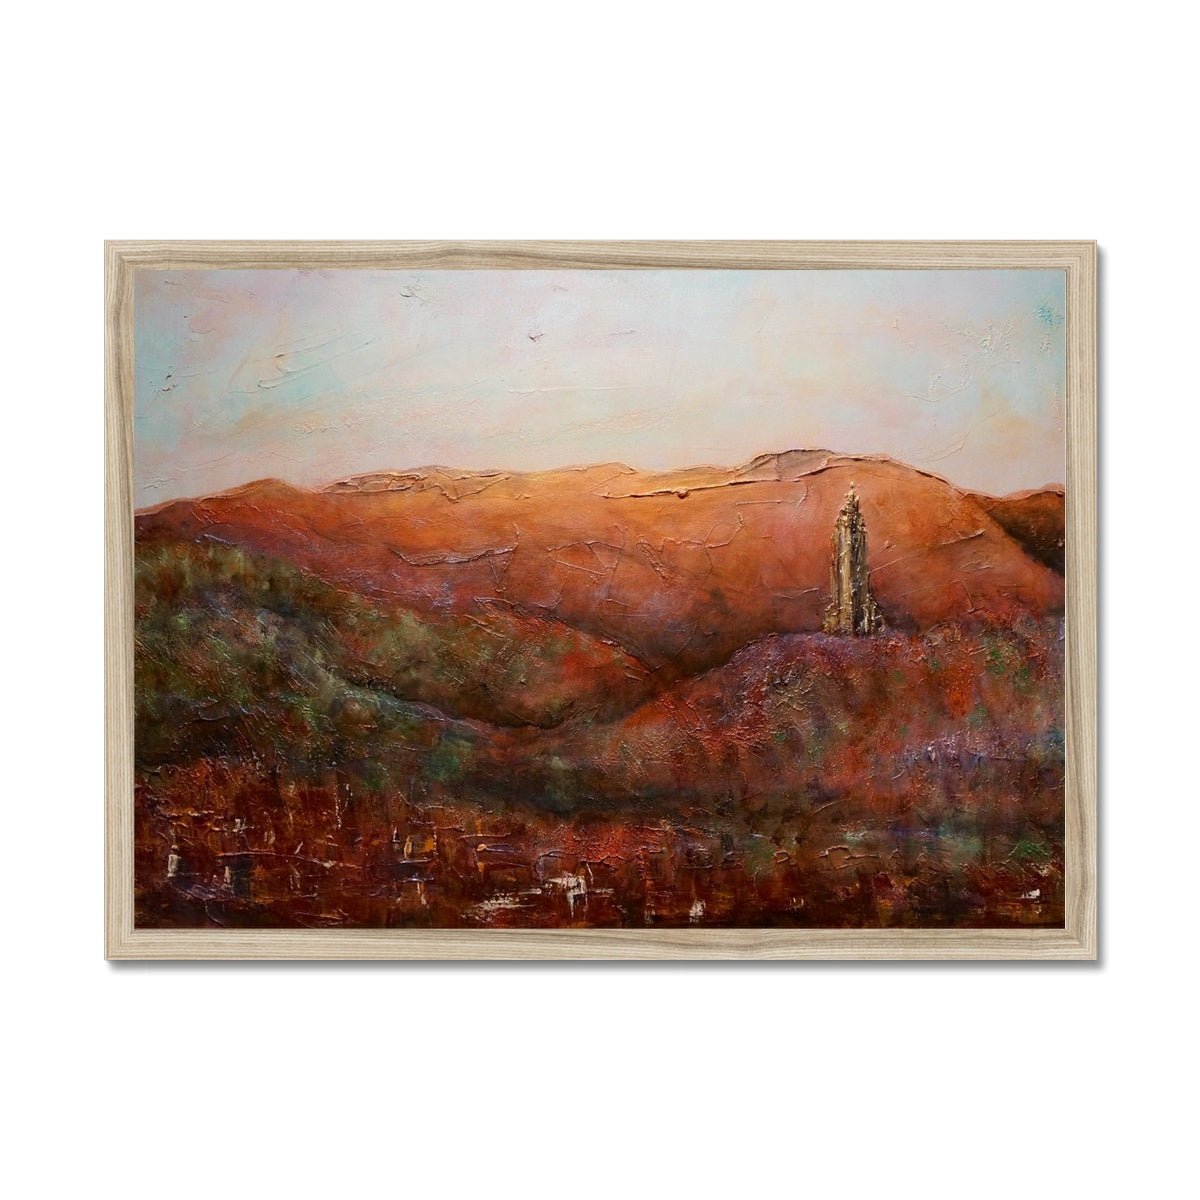 The Wallace Monument Painting | Framed Prints From Scotland-Framed Prints-Historic & Iconic Scotland Art Gallery-A2 Landscape-Natural Frame-Paintings, Prints, Homeware, Art Gifts From Scotland By Scottish Artist Kevin Hunter